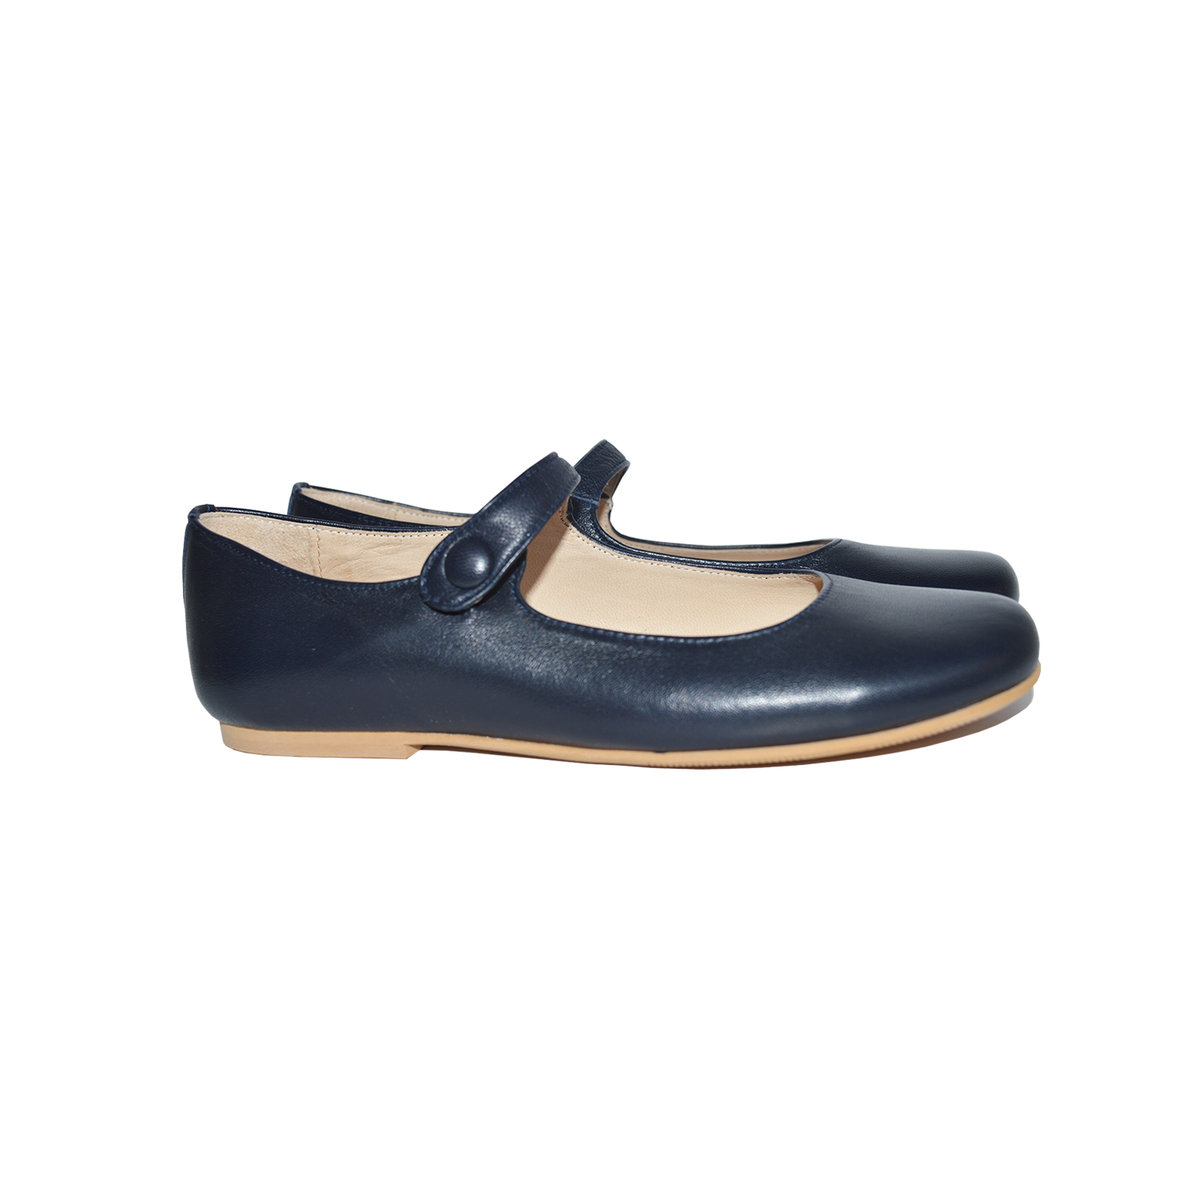 Girls Navy Blue Leather Mary Jane Shoes 